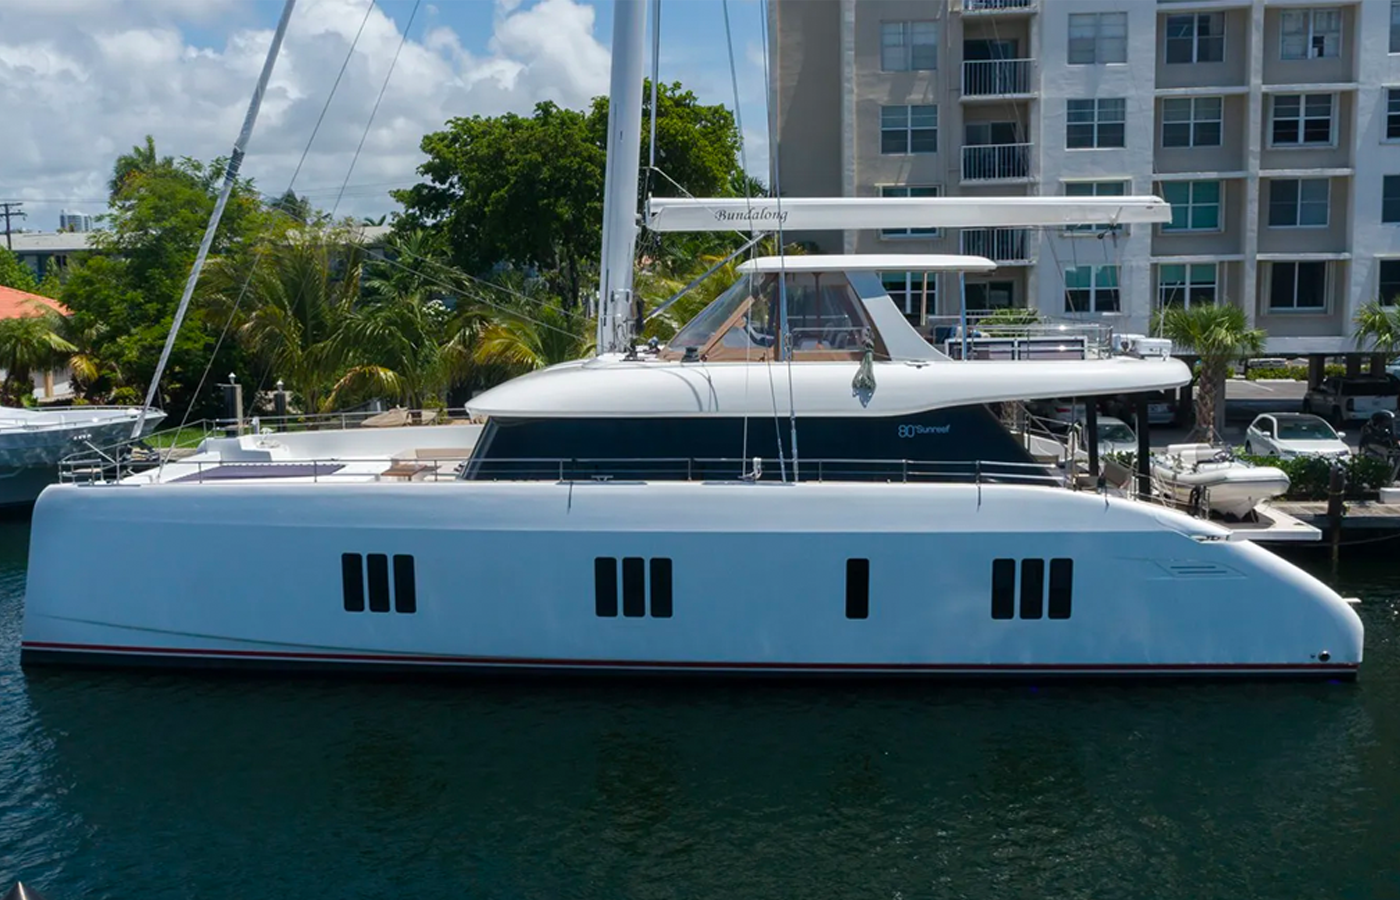 80 Sunreef Sailing Yacht Sold By Wiley Sharp